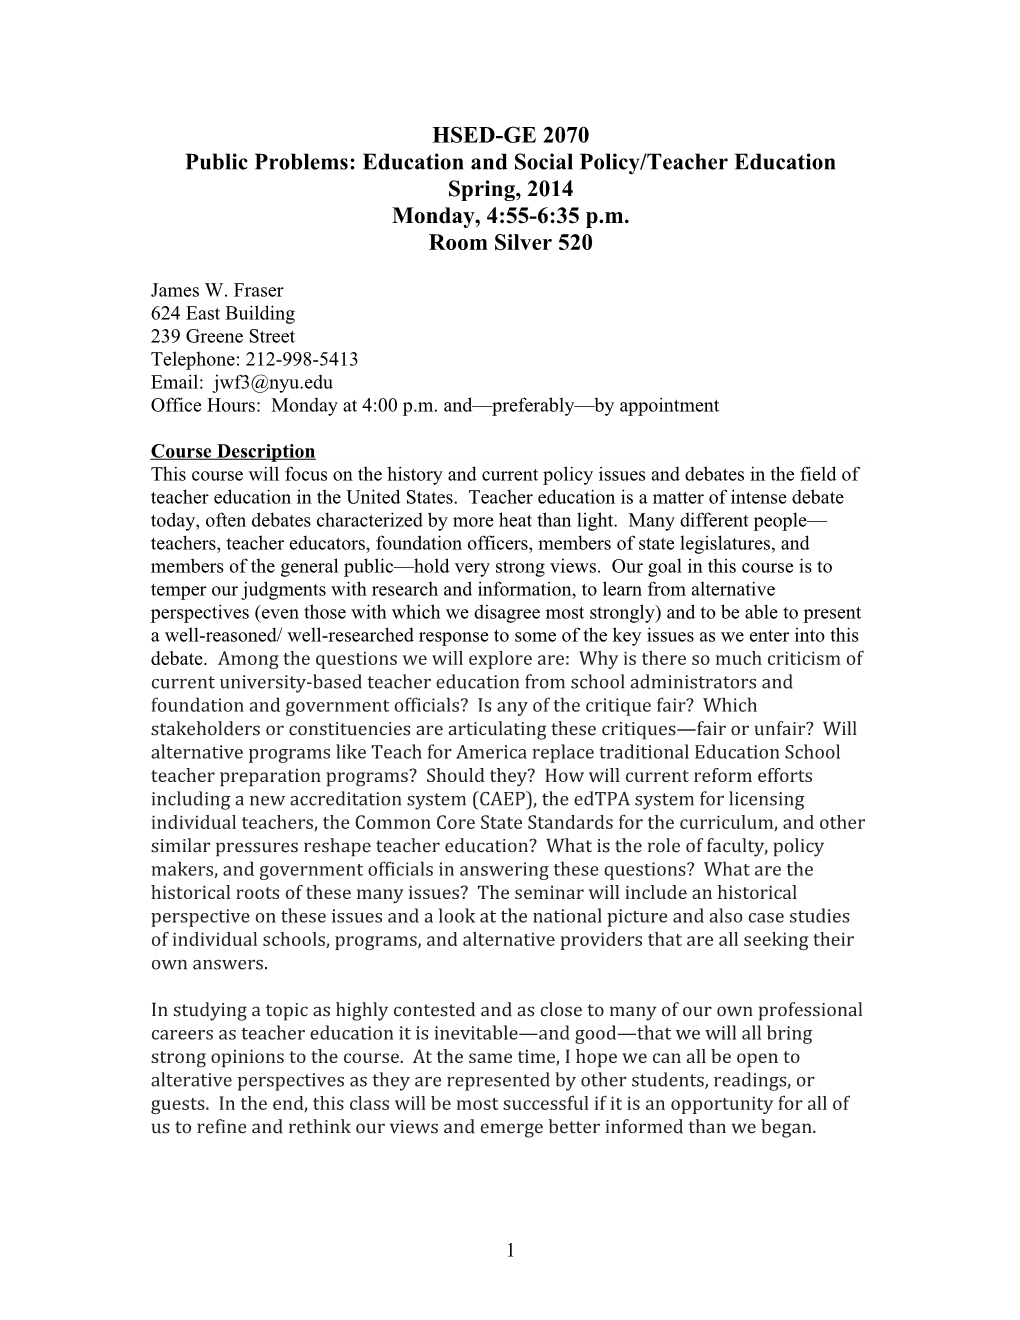 Public Problems: Education and Social Policy/Teacher Education